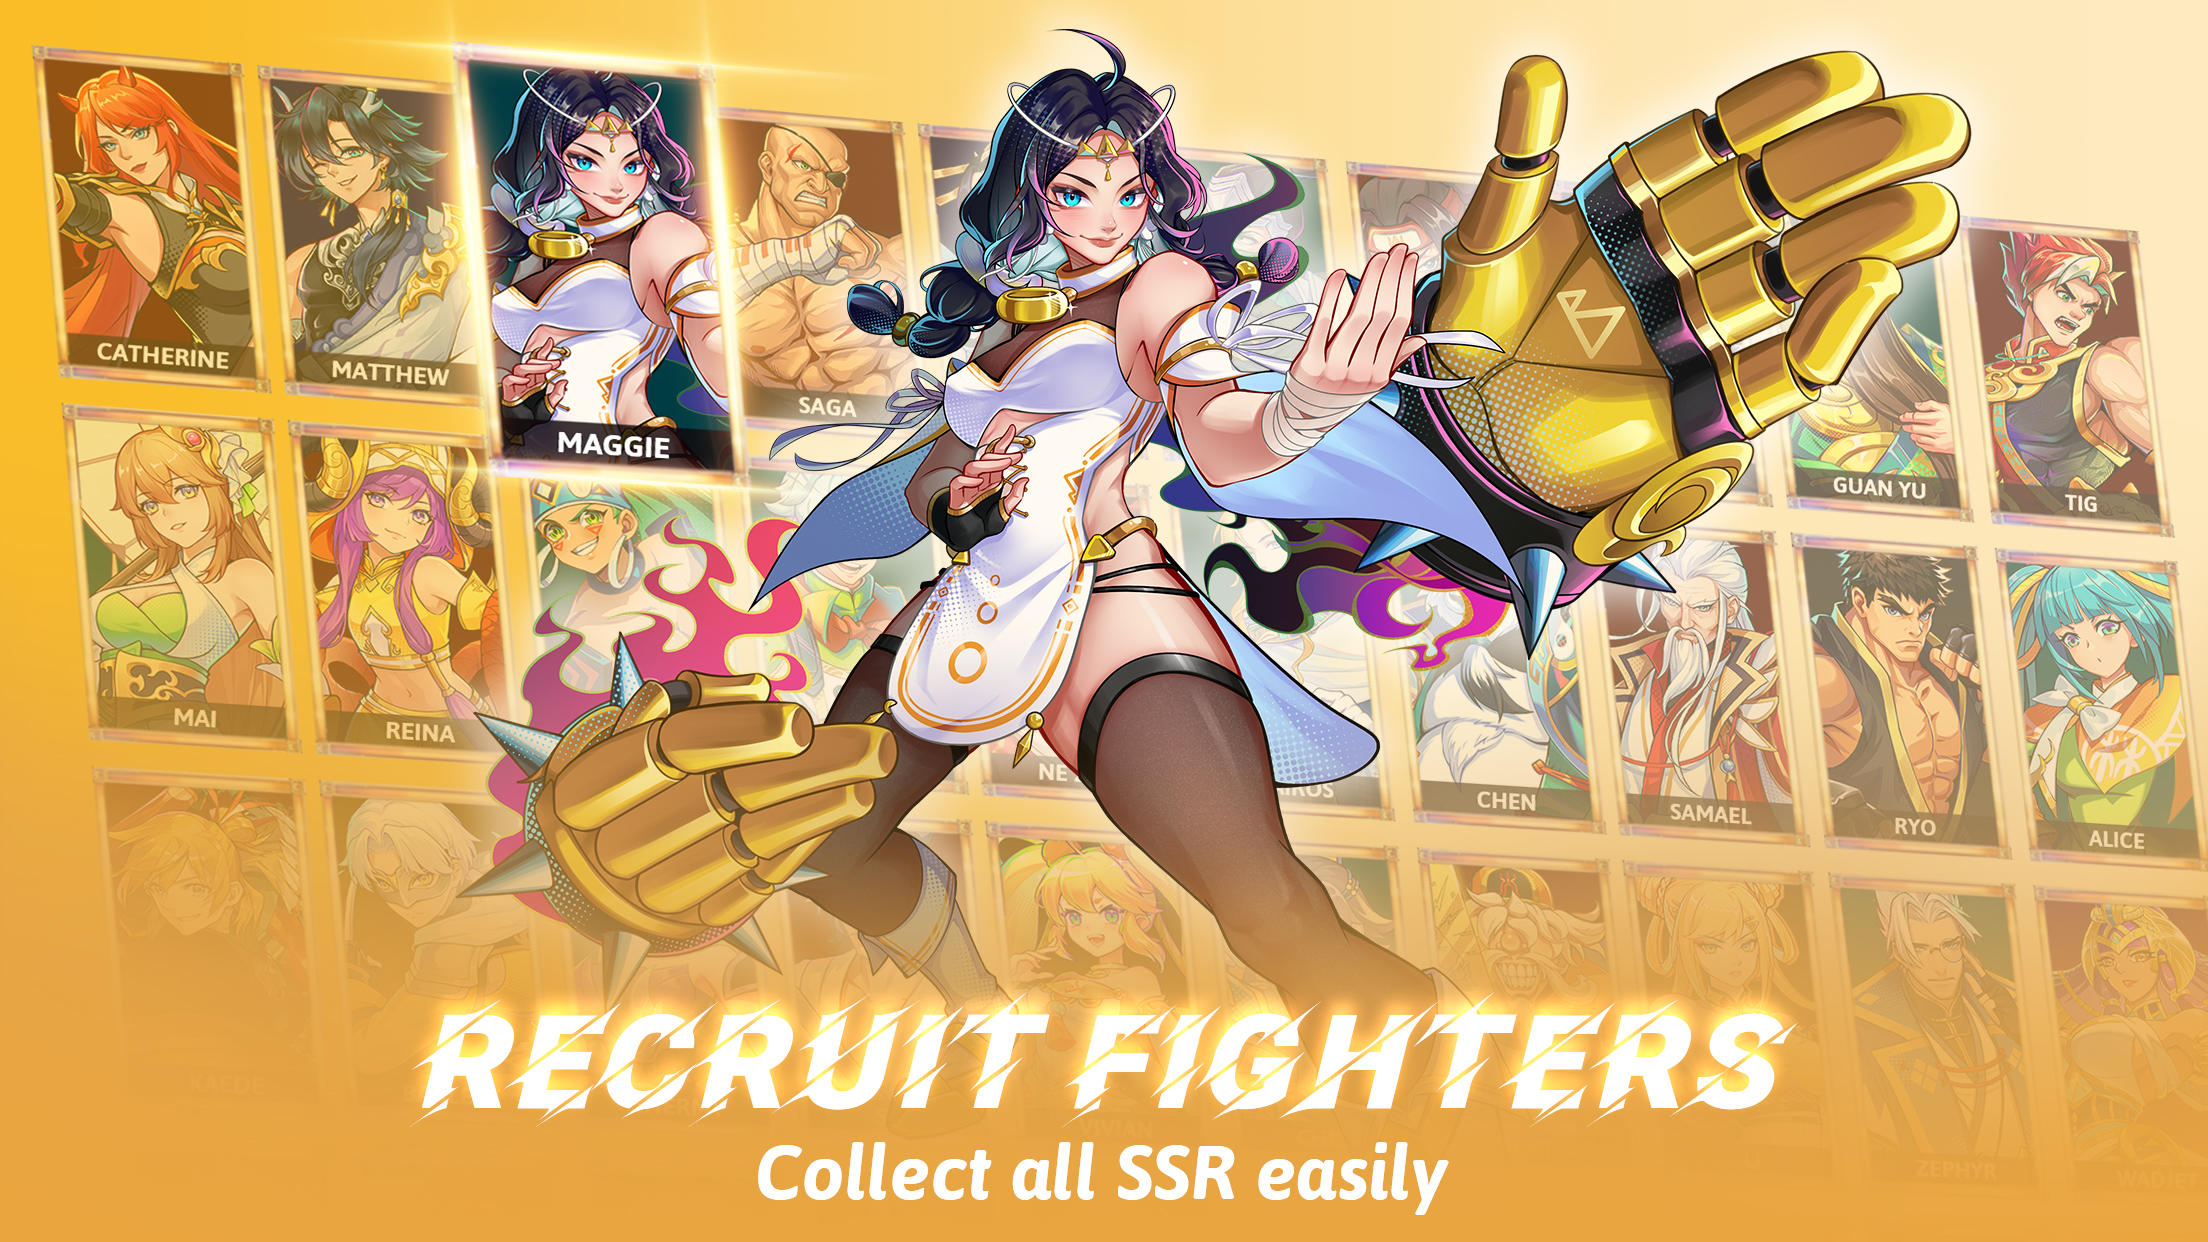 Legend of Fighters: Duel Star codes